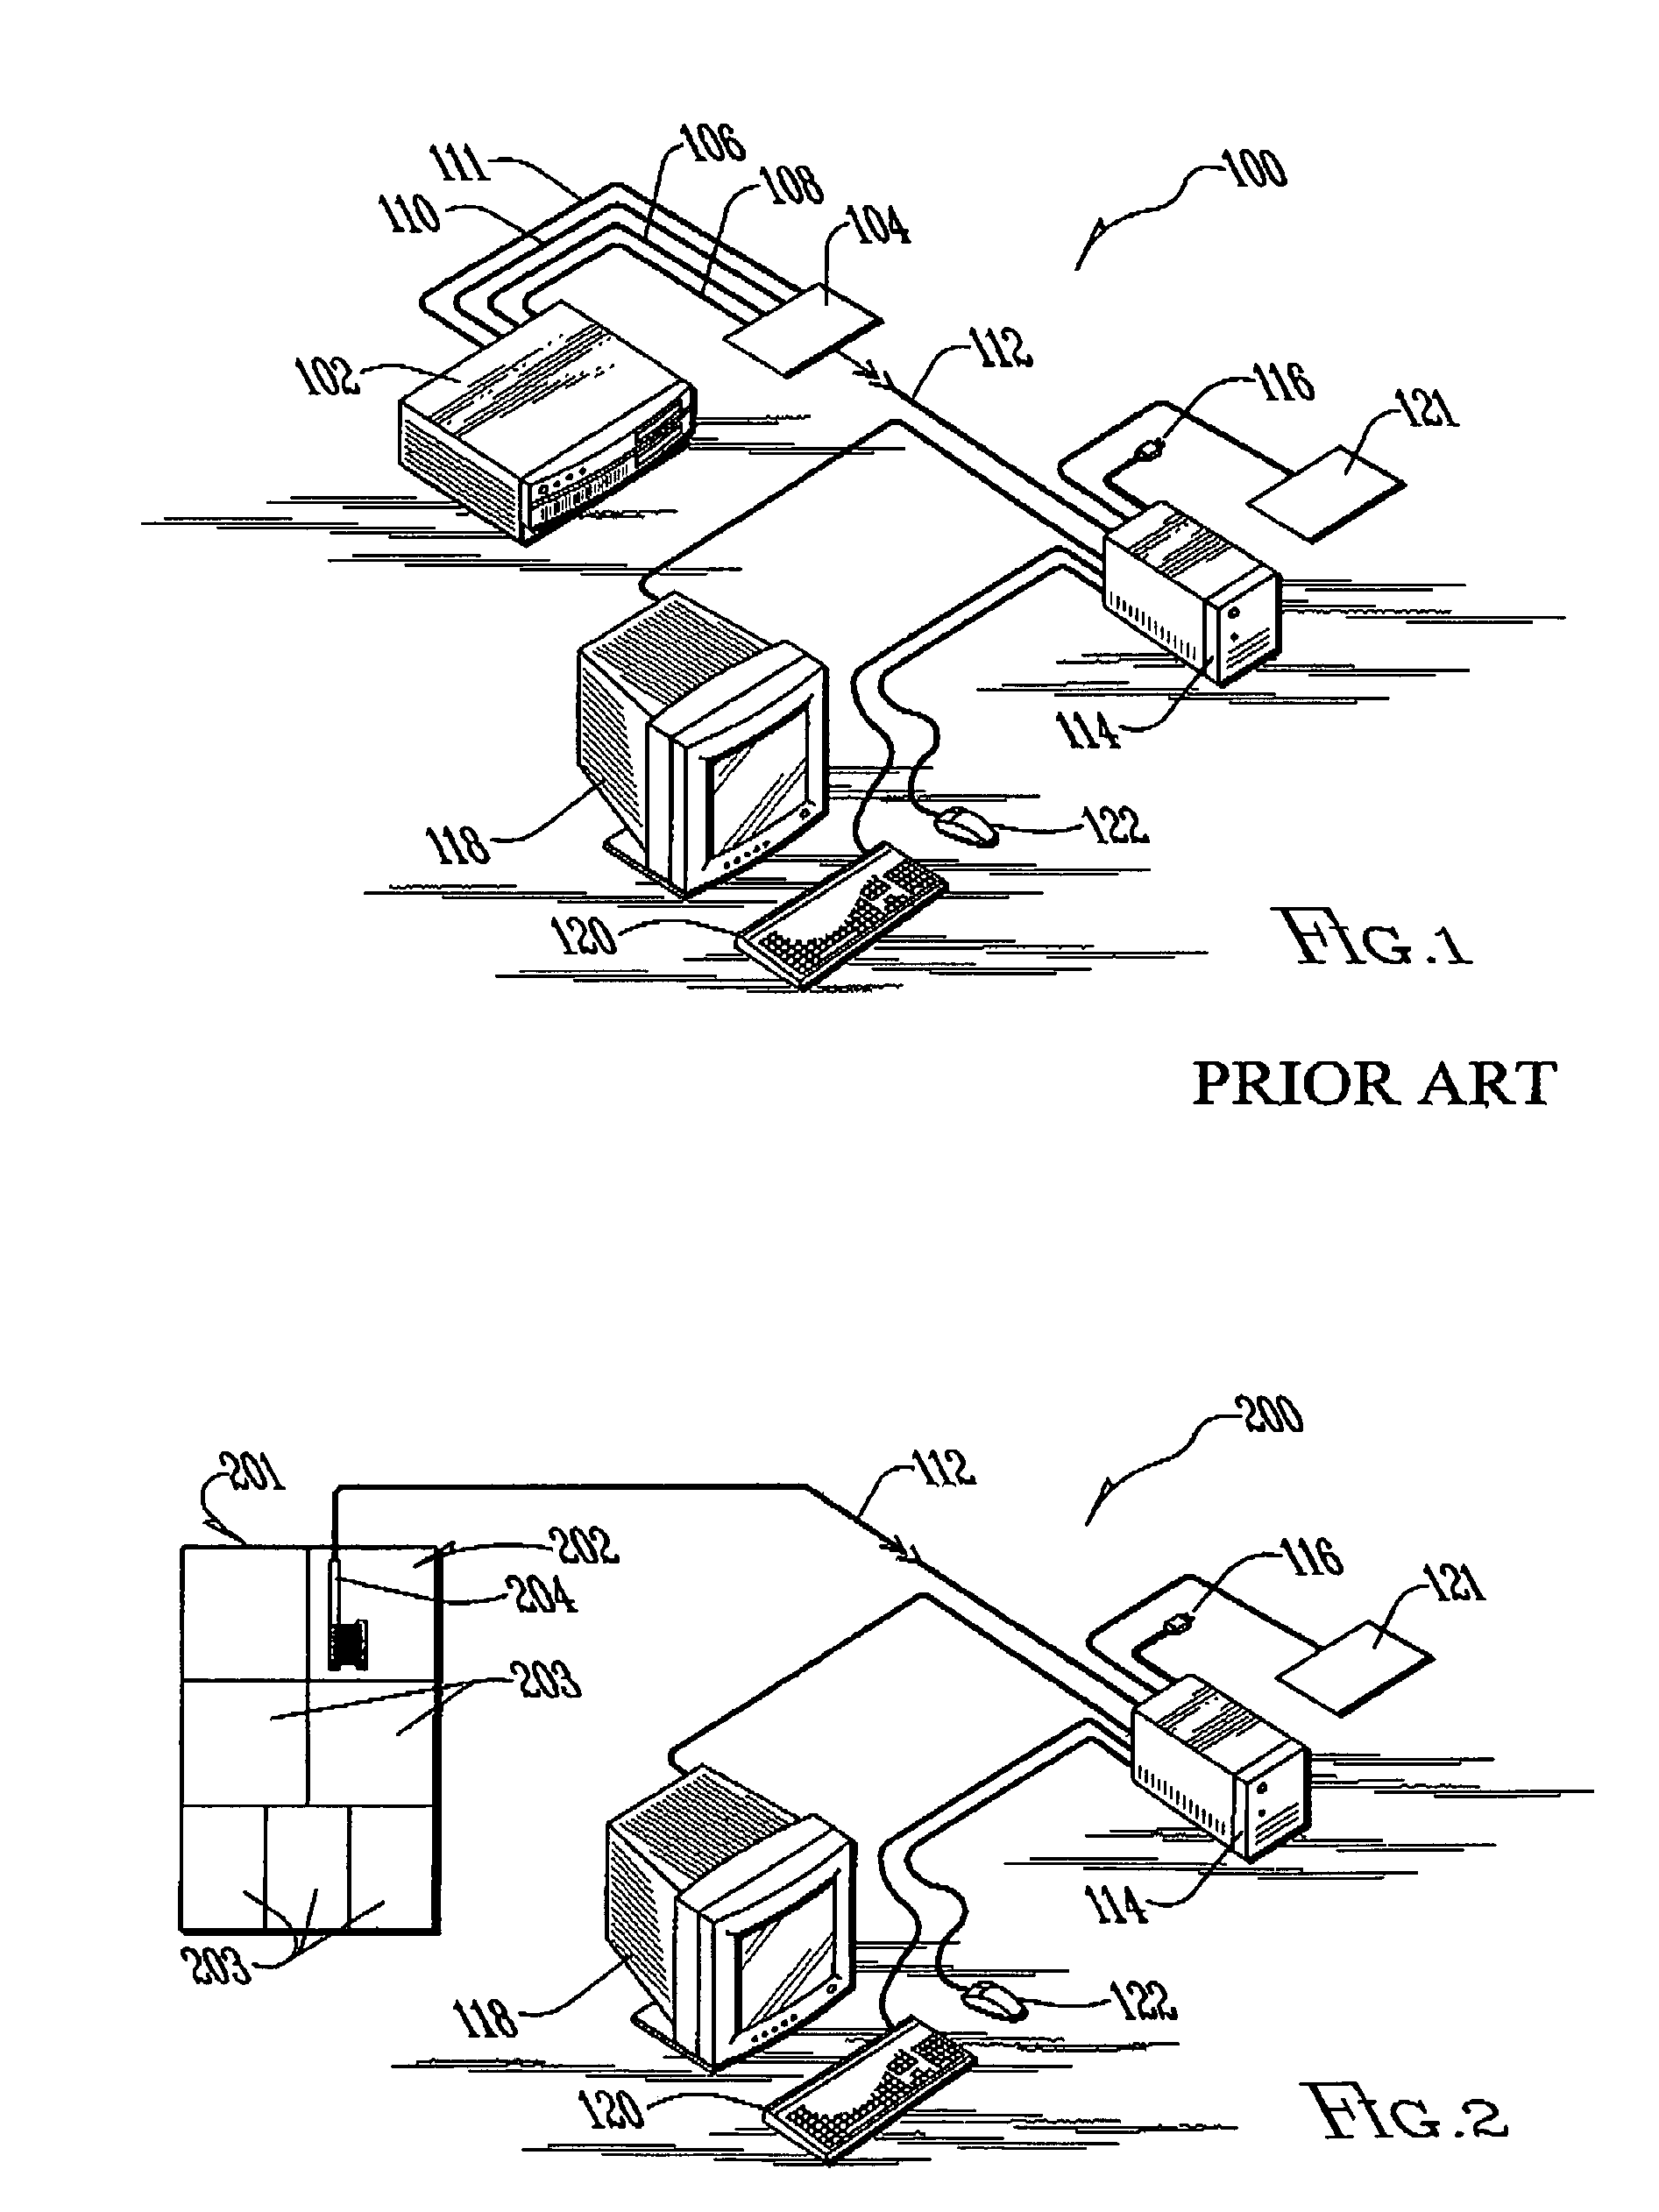 Method and system for extending a distance between a personal computer and a keyboard, video display, a mouse, and serial port